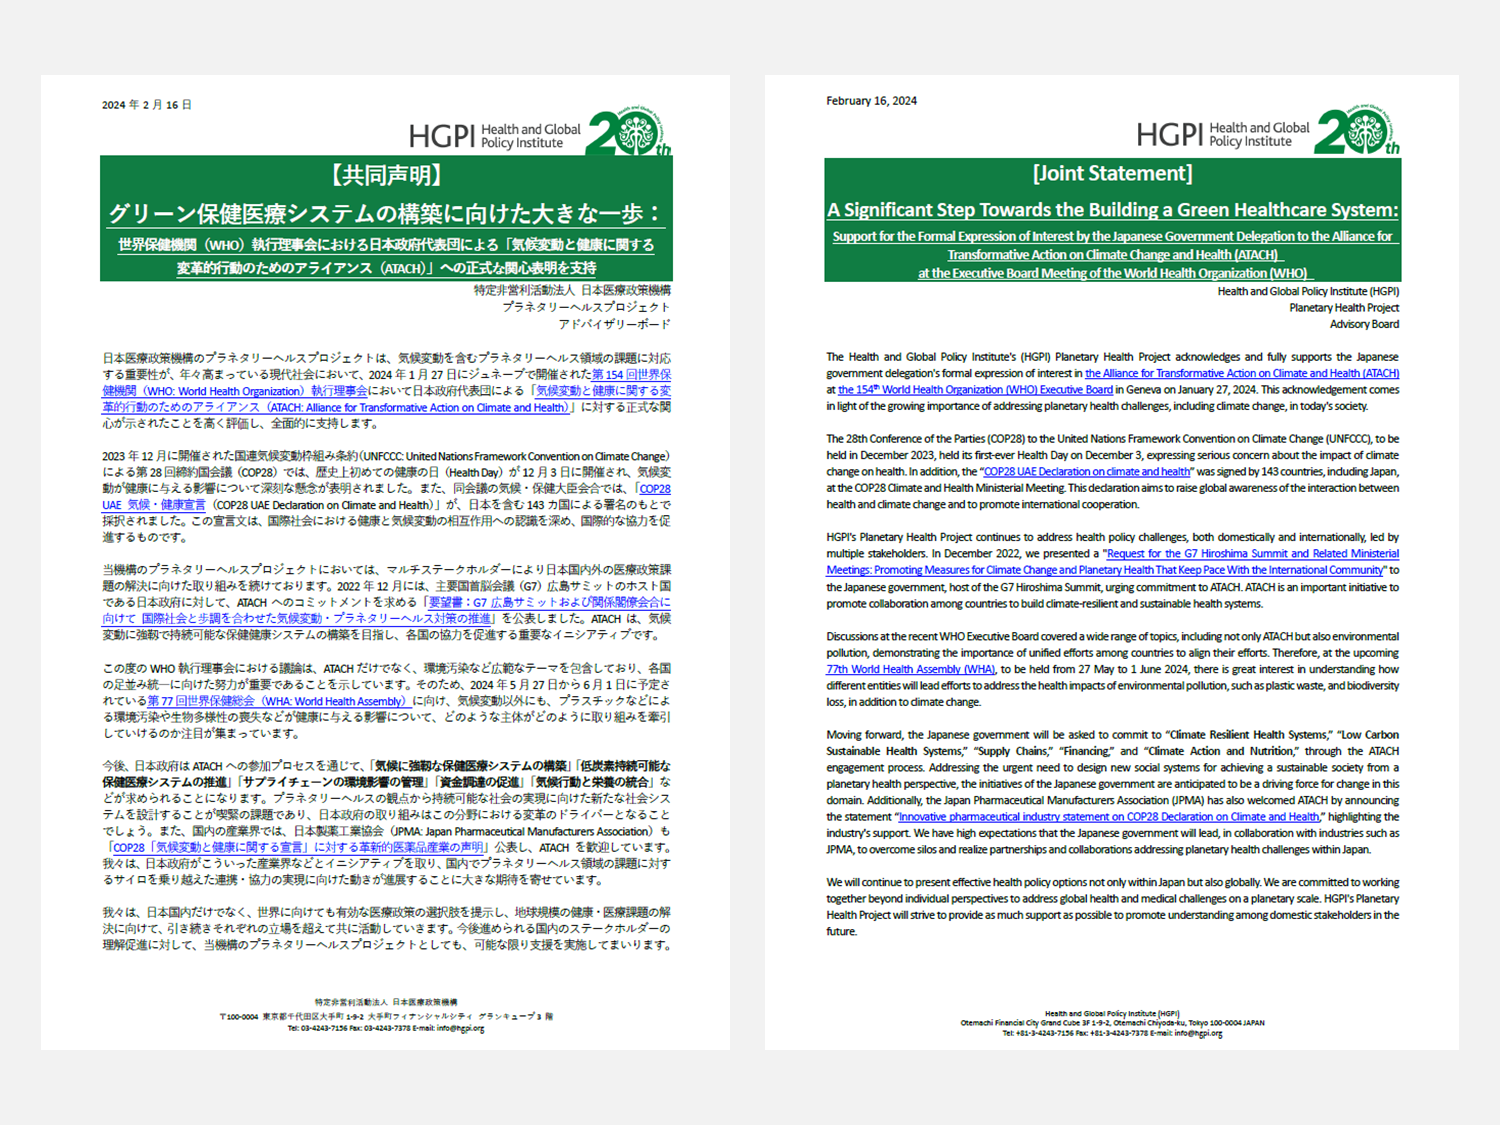 [Announcement] A Significant Step Towards the Building a Green Healthcare System: Support for the Formal Expression of Interest by the Japanese Government Delegation to the ATACH at the Executive Board Meeting of the WHO (February 16, 2024)